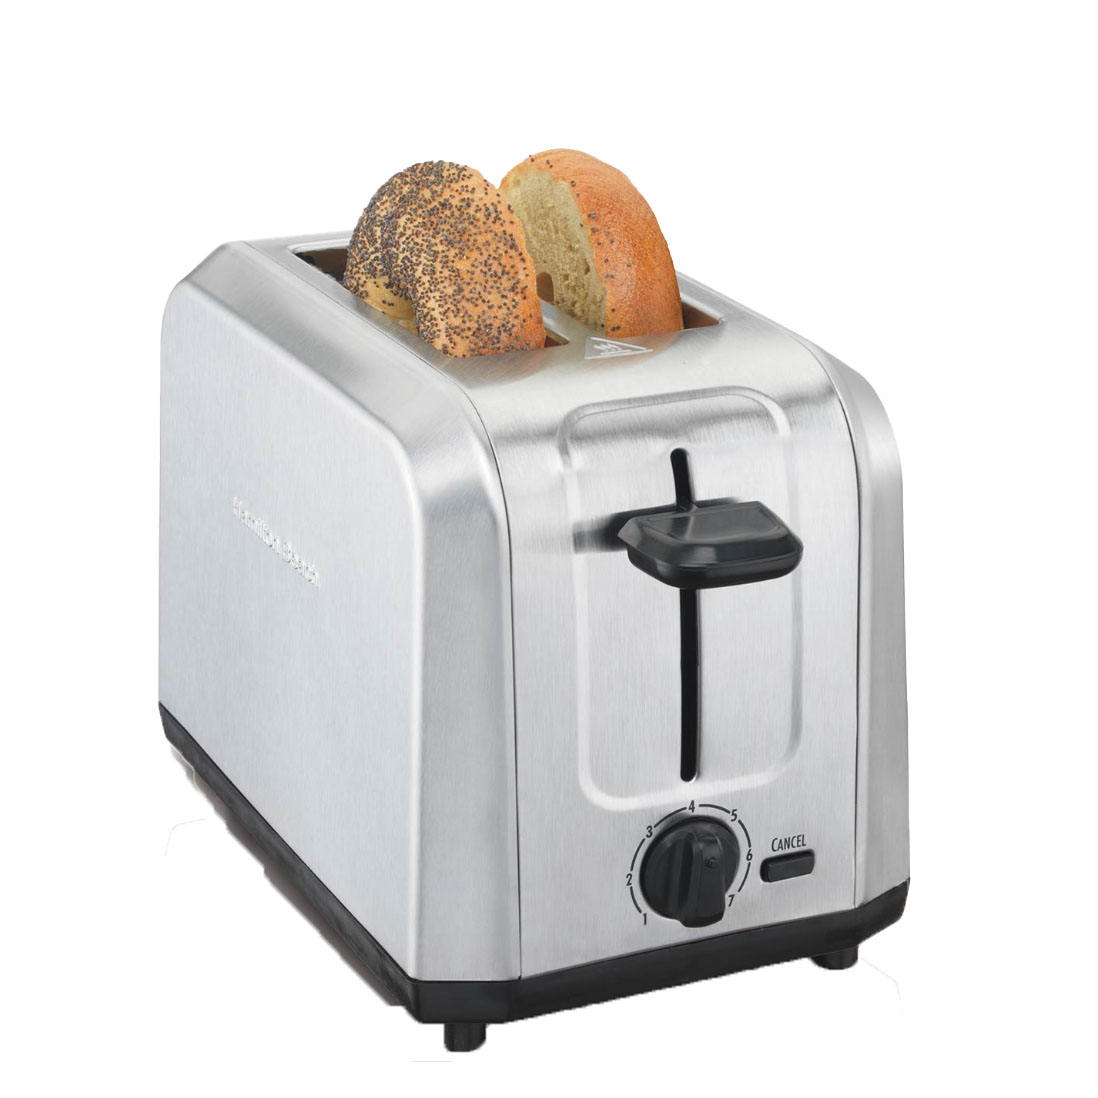 Hamilton Beach Brushed Stainless Steel 2-Slice Toaster with 2 bagels